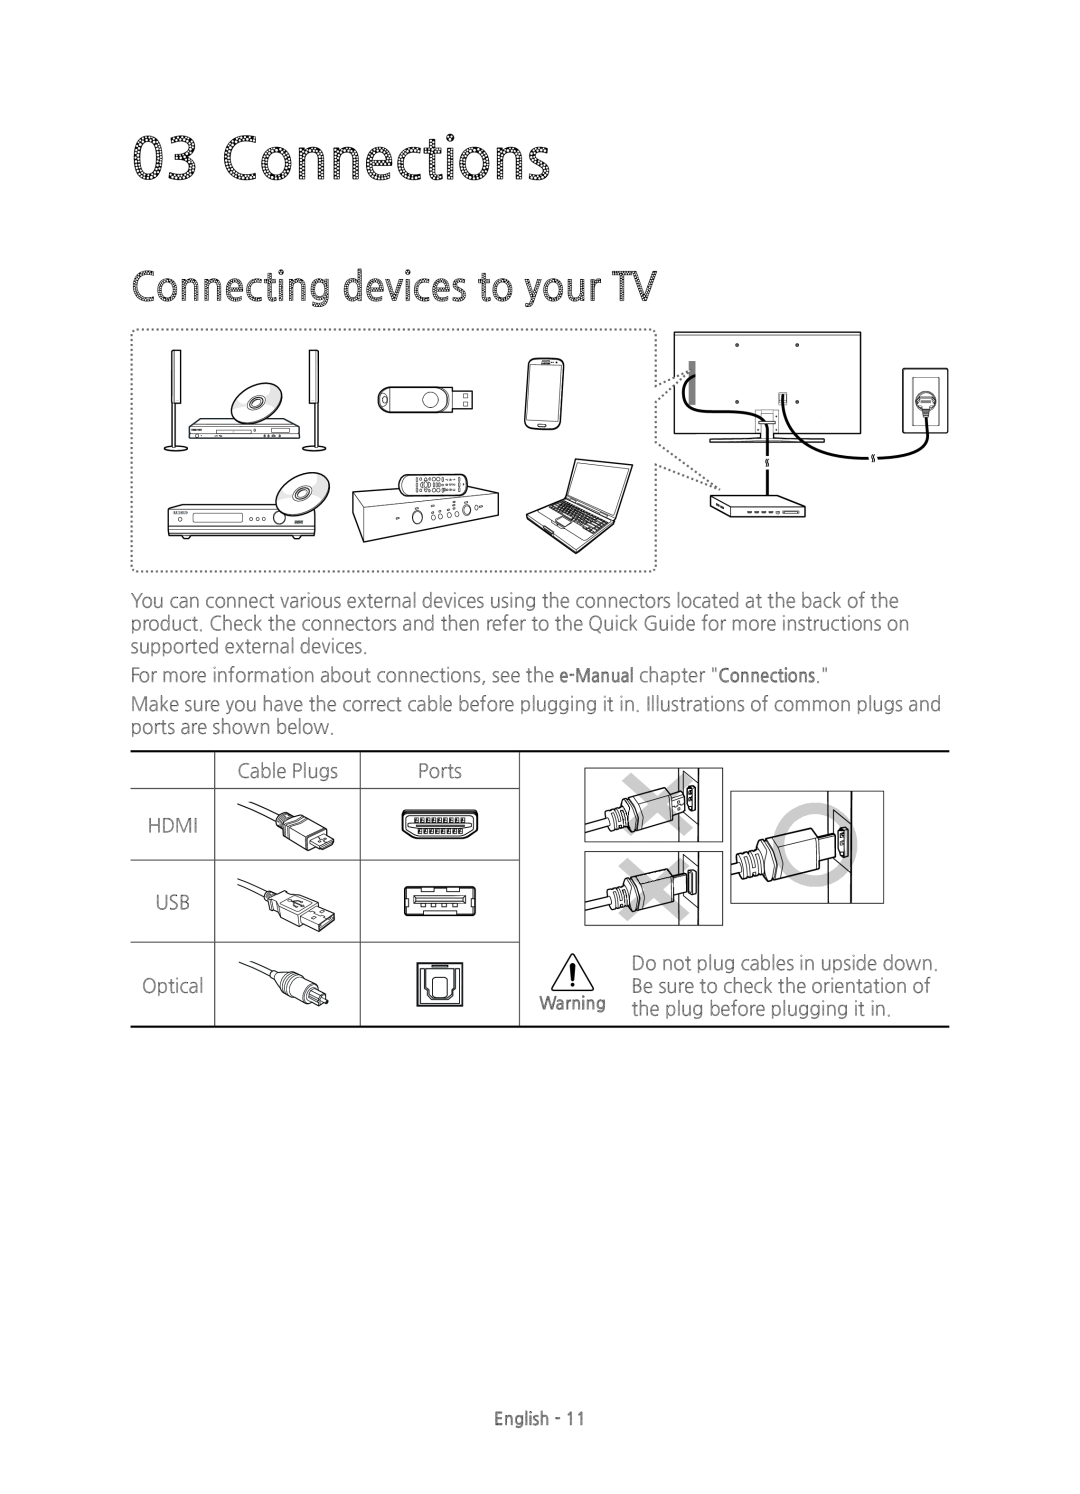 Samsung UE55JS8500TXZF, UE48JS8500TXXC, UE55JS8500TXXC, UE48JS8500TXZF manual Connections, Connecting devices to your TV 